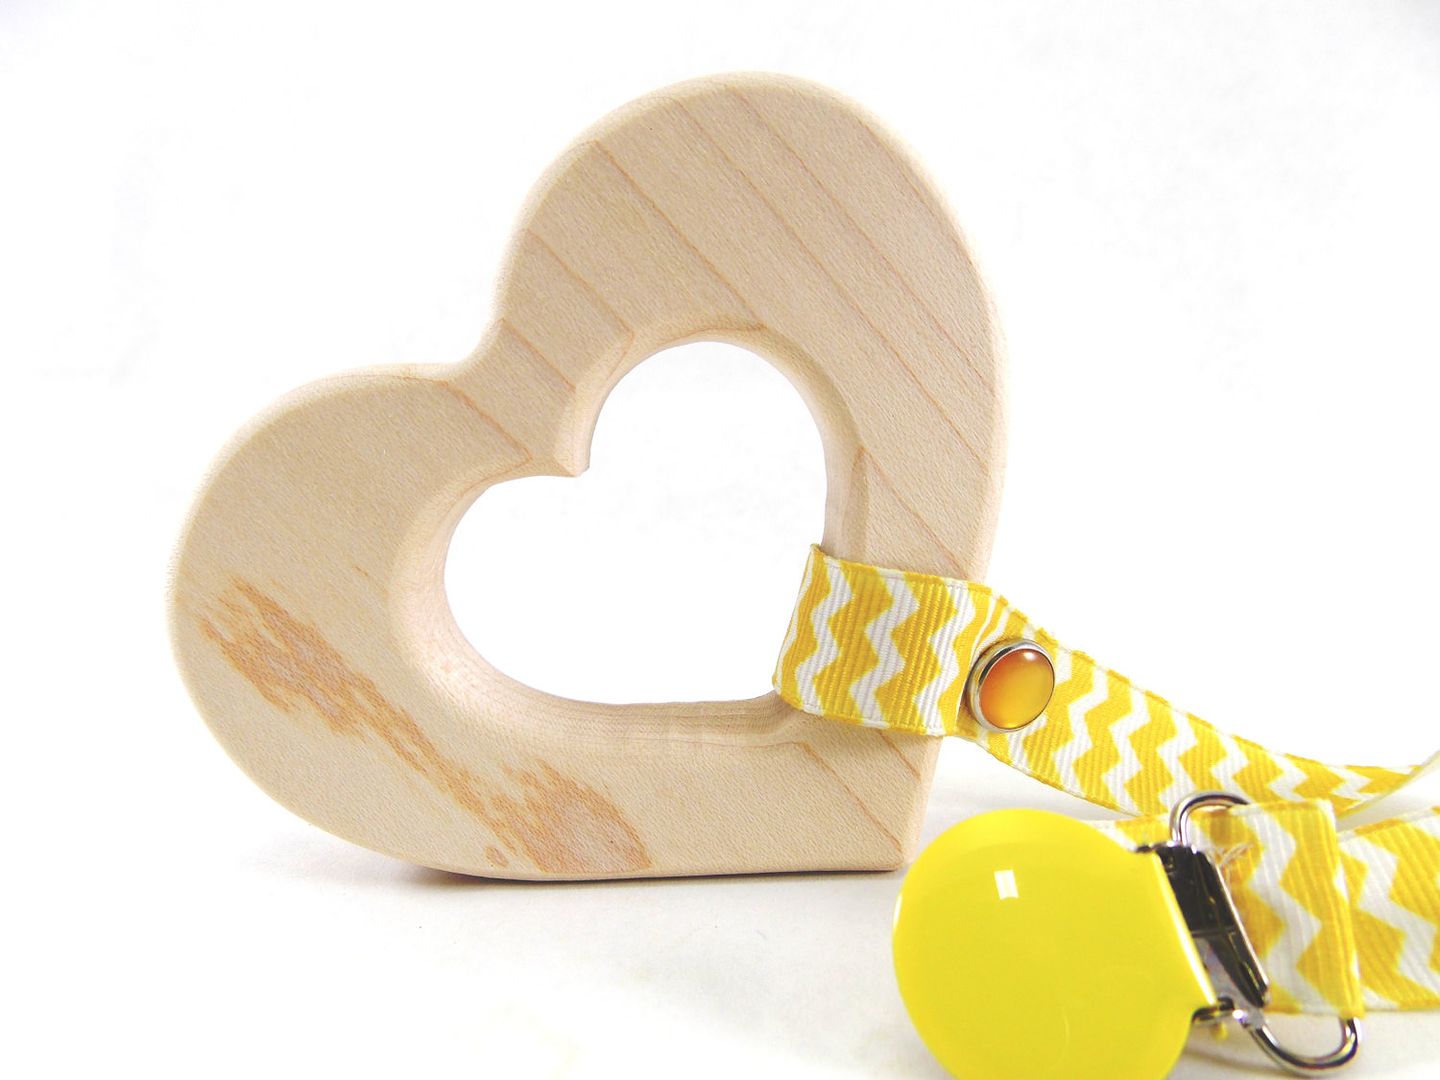 Personalized wooden heart teether: Cute Valentine's Day gift idea for babies